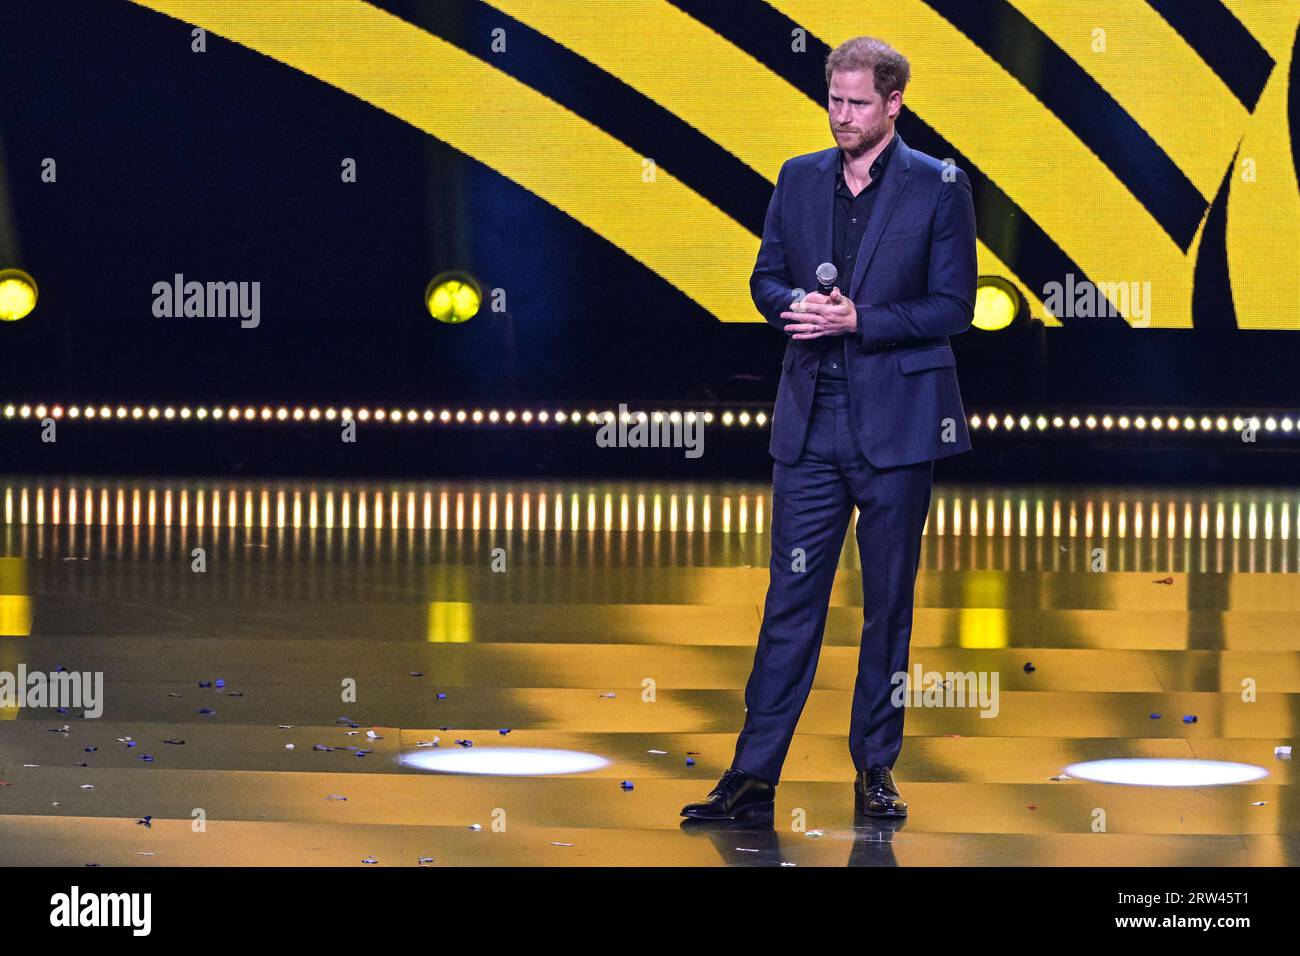 Düsseldorf, Germany. 16th Sep, 2023. Prince Harry, the Duke of Sussex, speaks at the ceremony, visibly moved and emotional in parts. The Invictus Games Düsseldorf conclude with a closing ceremony at Merkur Spiel Arena. 21 nations participated in the games this year. Credit: Imageplotter/Alamy Live News Stock Photo